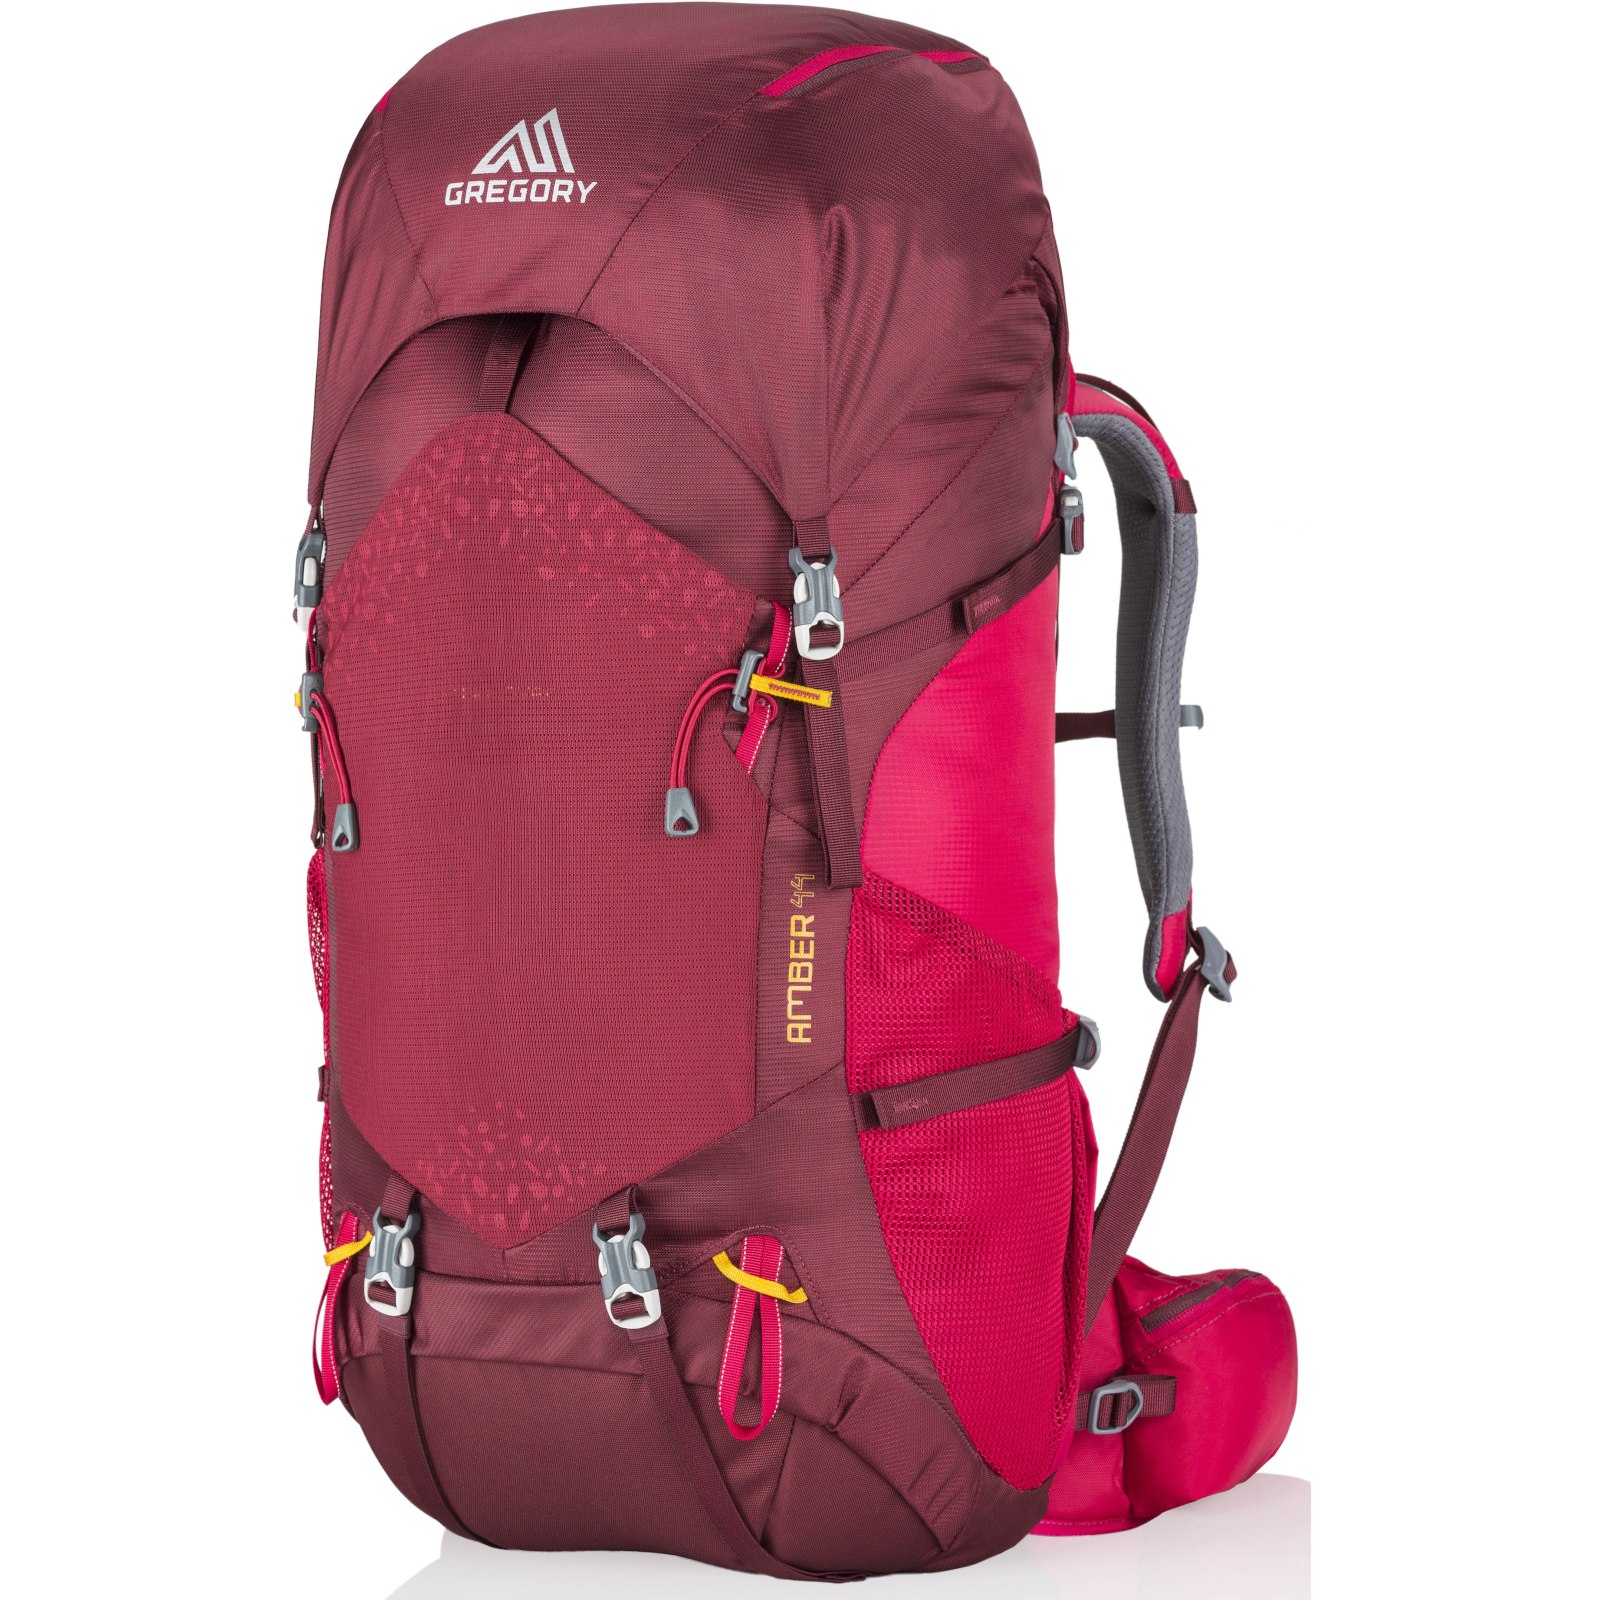 Image of Gregory Amber 44 Women's Backpack - Chili Pepper Red